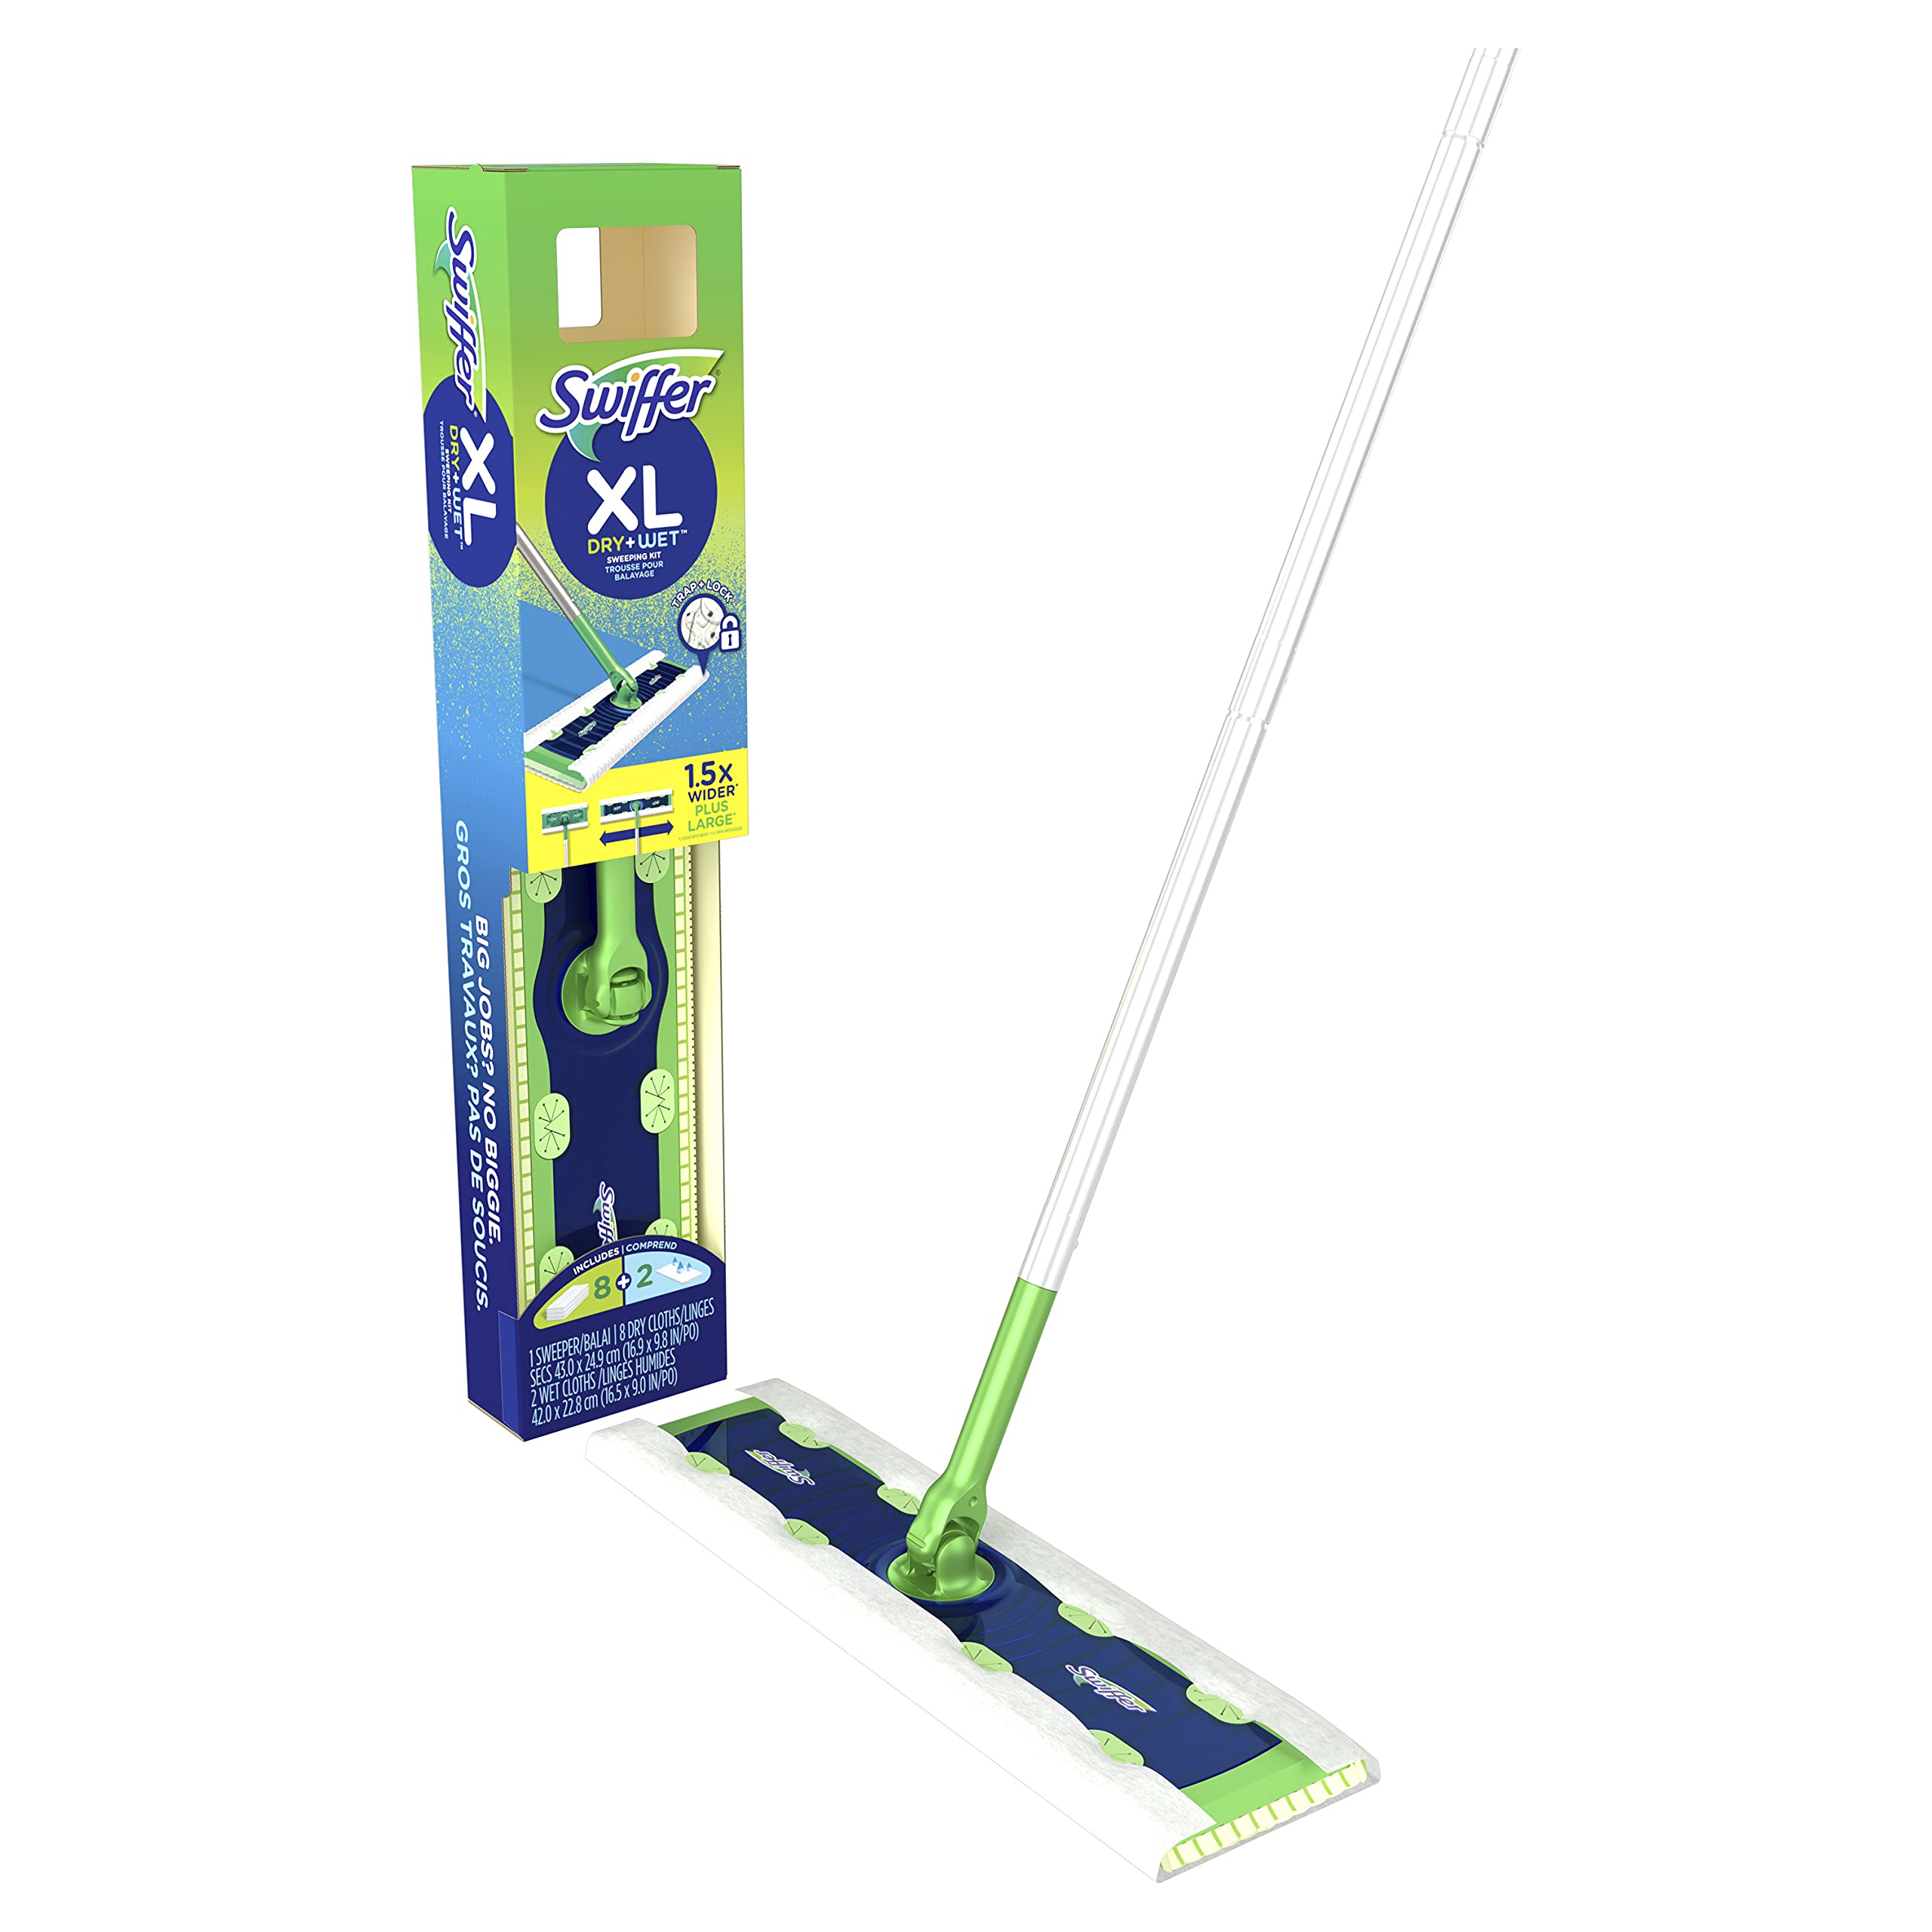 Swiffer Sweeper Cleaner Dry and Wet Mop Starter Kit India